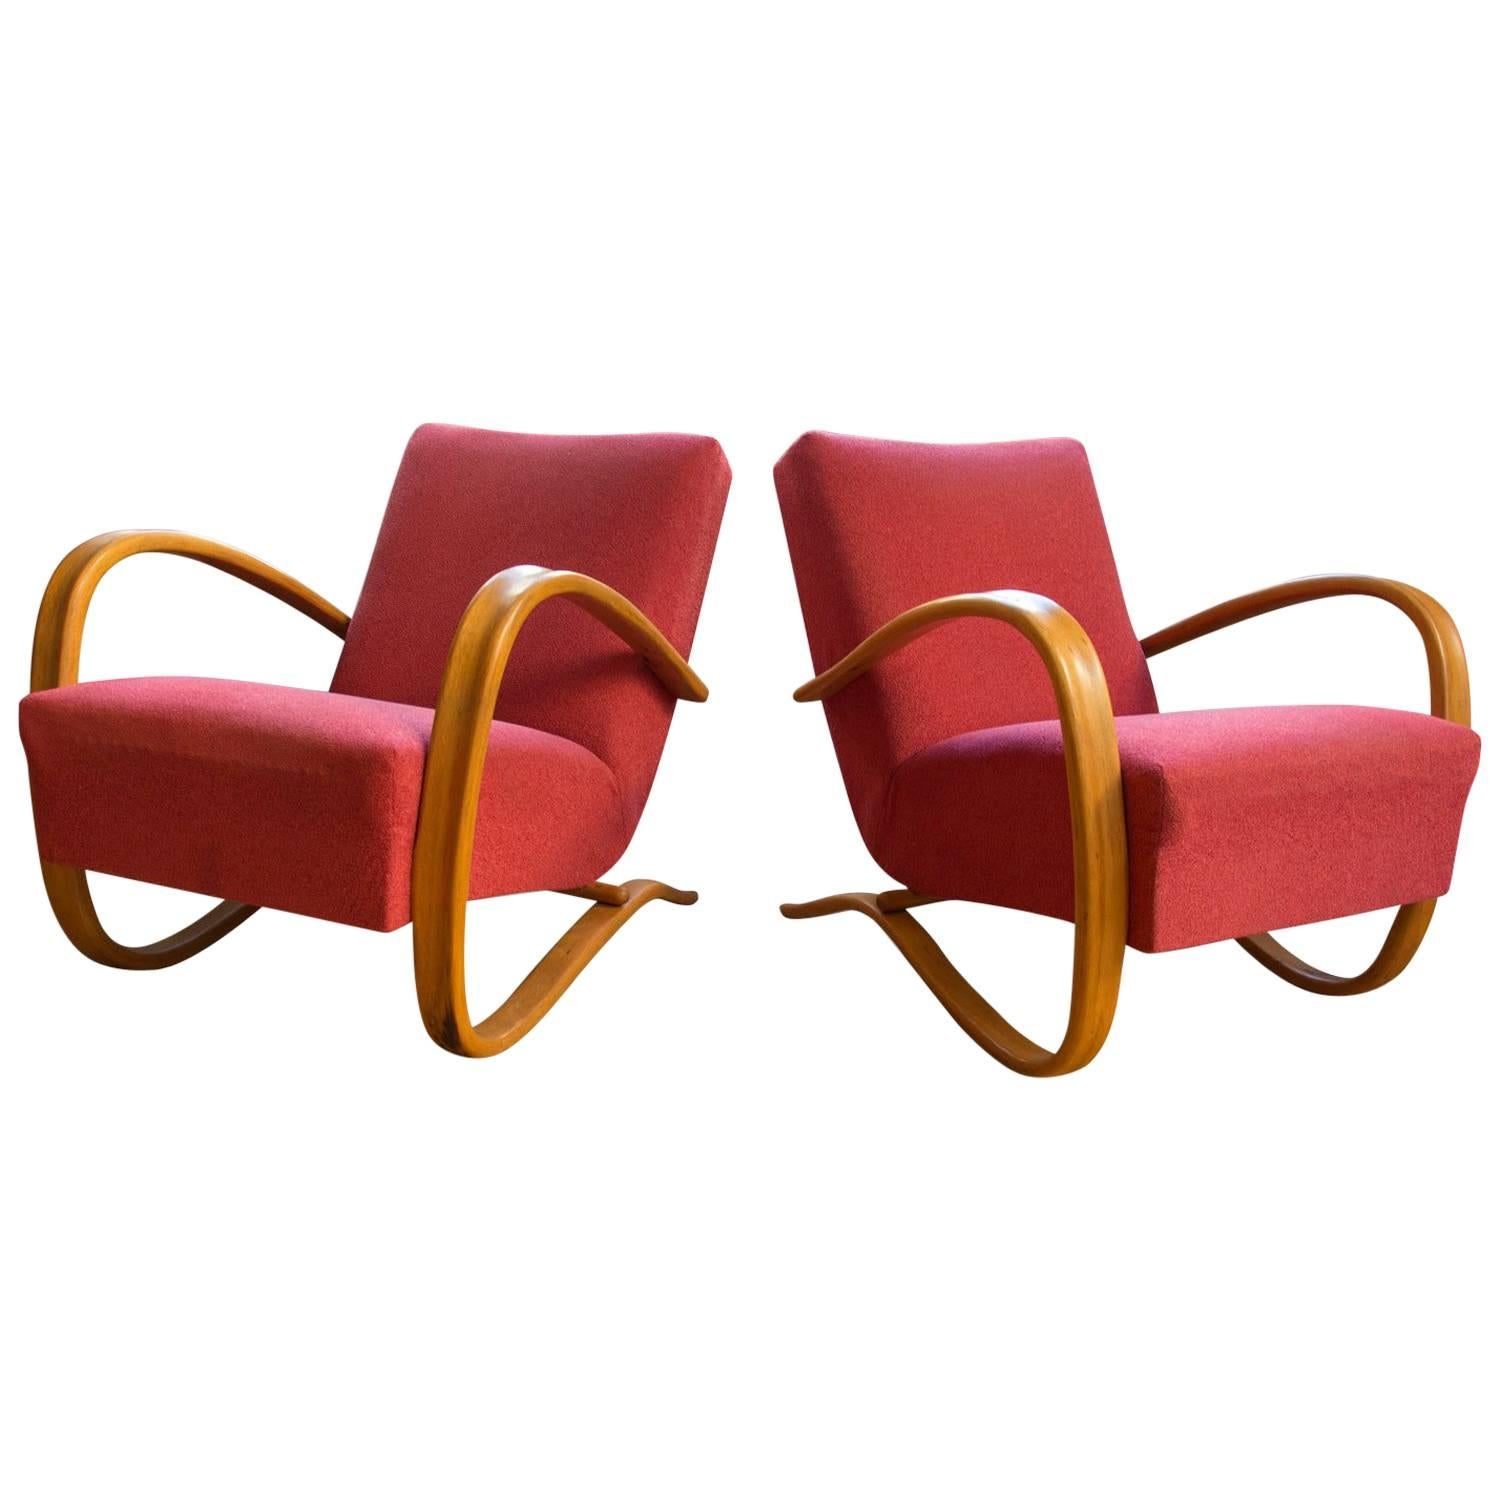 Pair of H-269 Armchairs Designed by Jindrich Halabala for UP Závody Brno